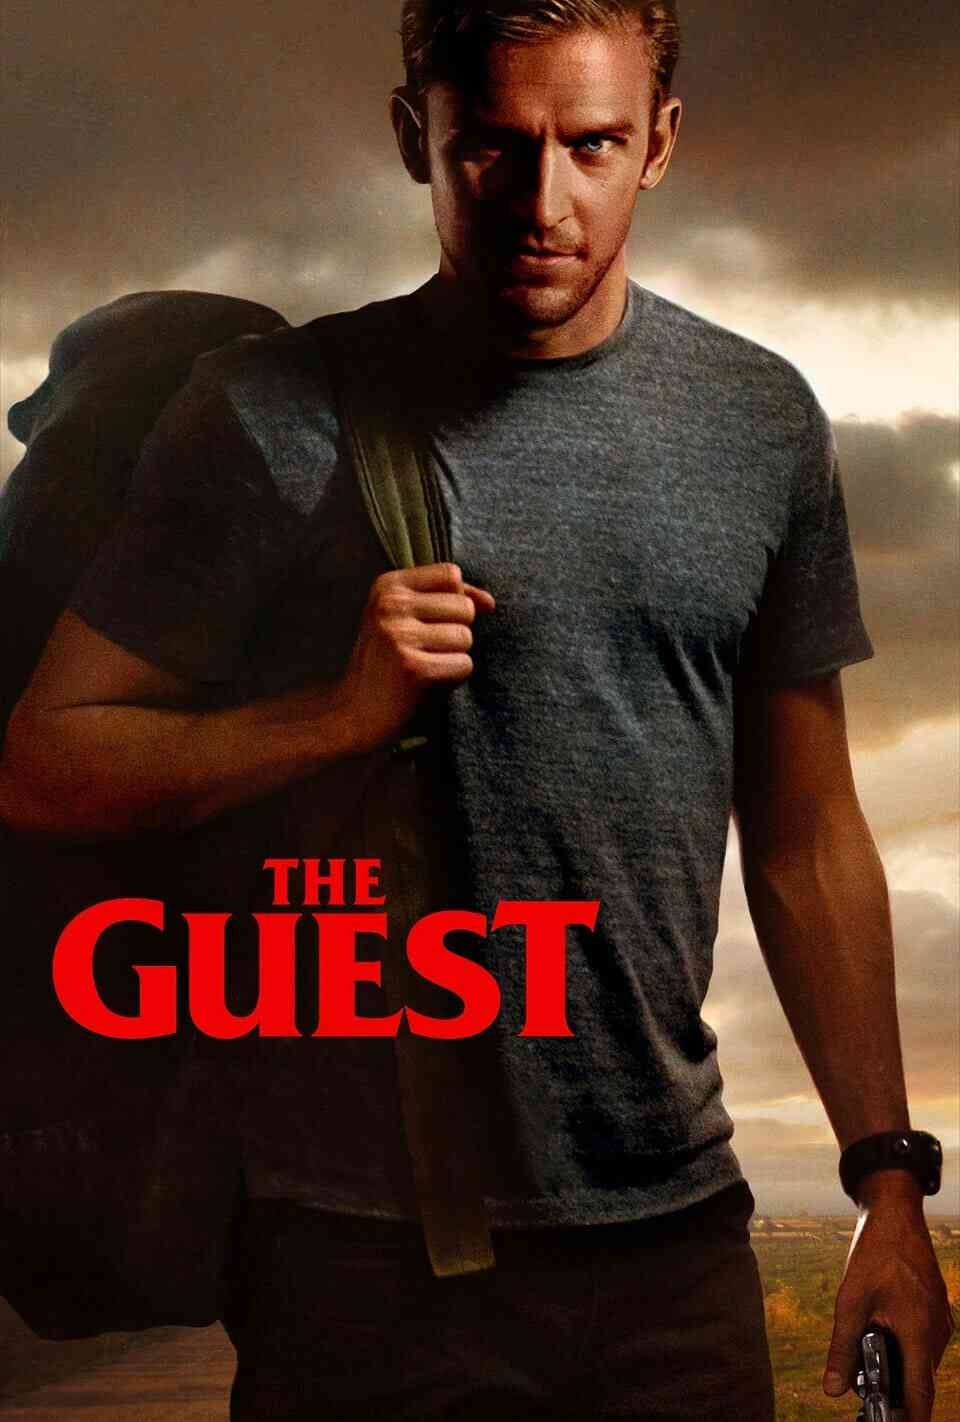 Read The Guest screenplay (poster)